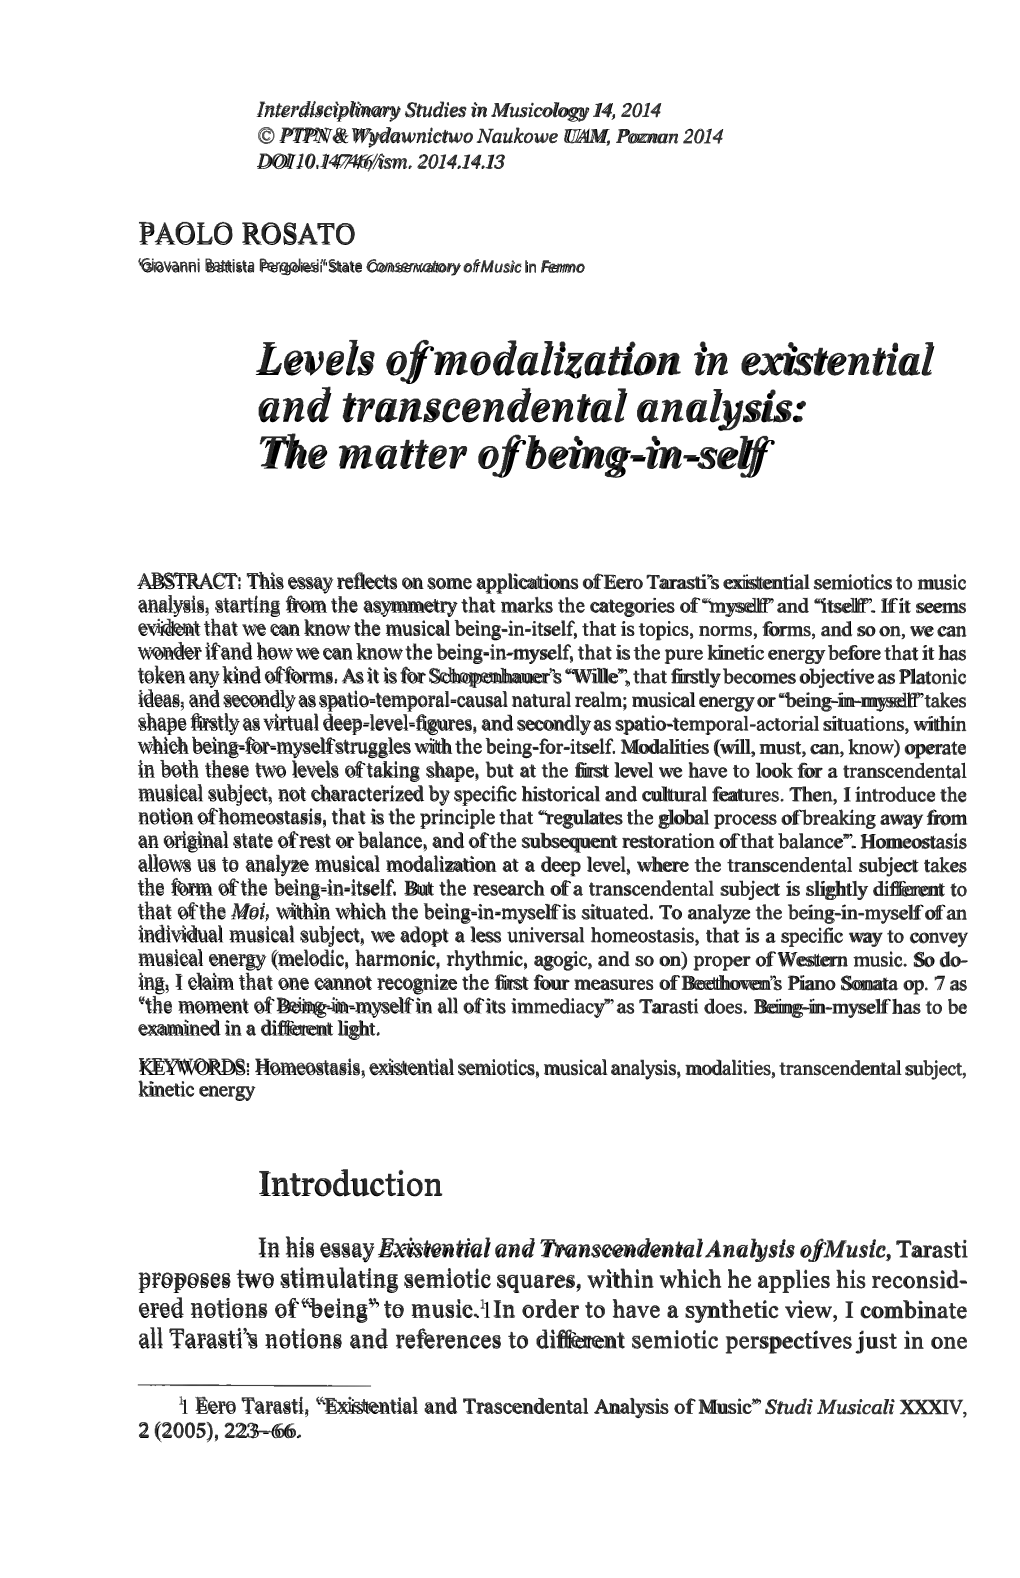 Levels of Modalization in Existential and Transcendental Analysis: the Matter of Being-In-Self